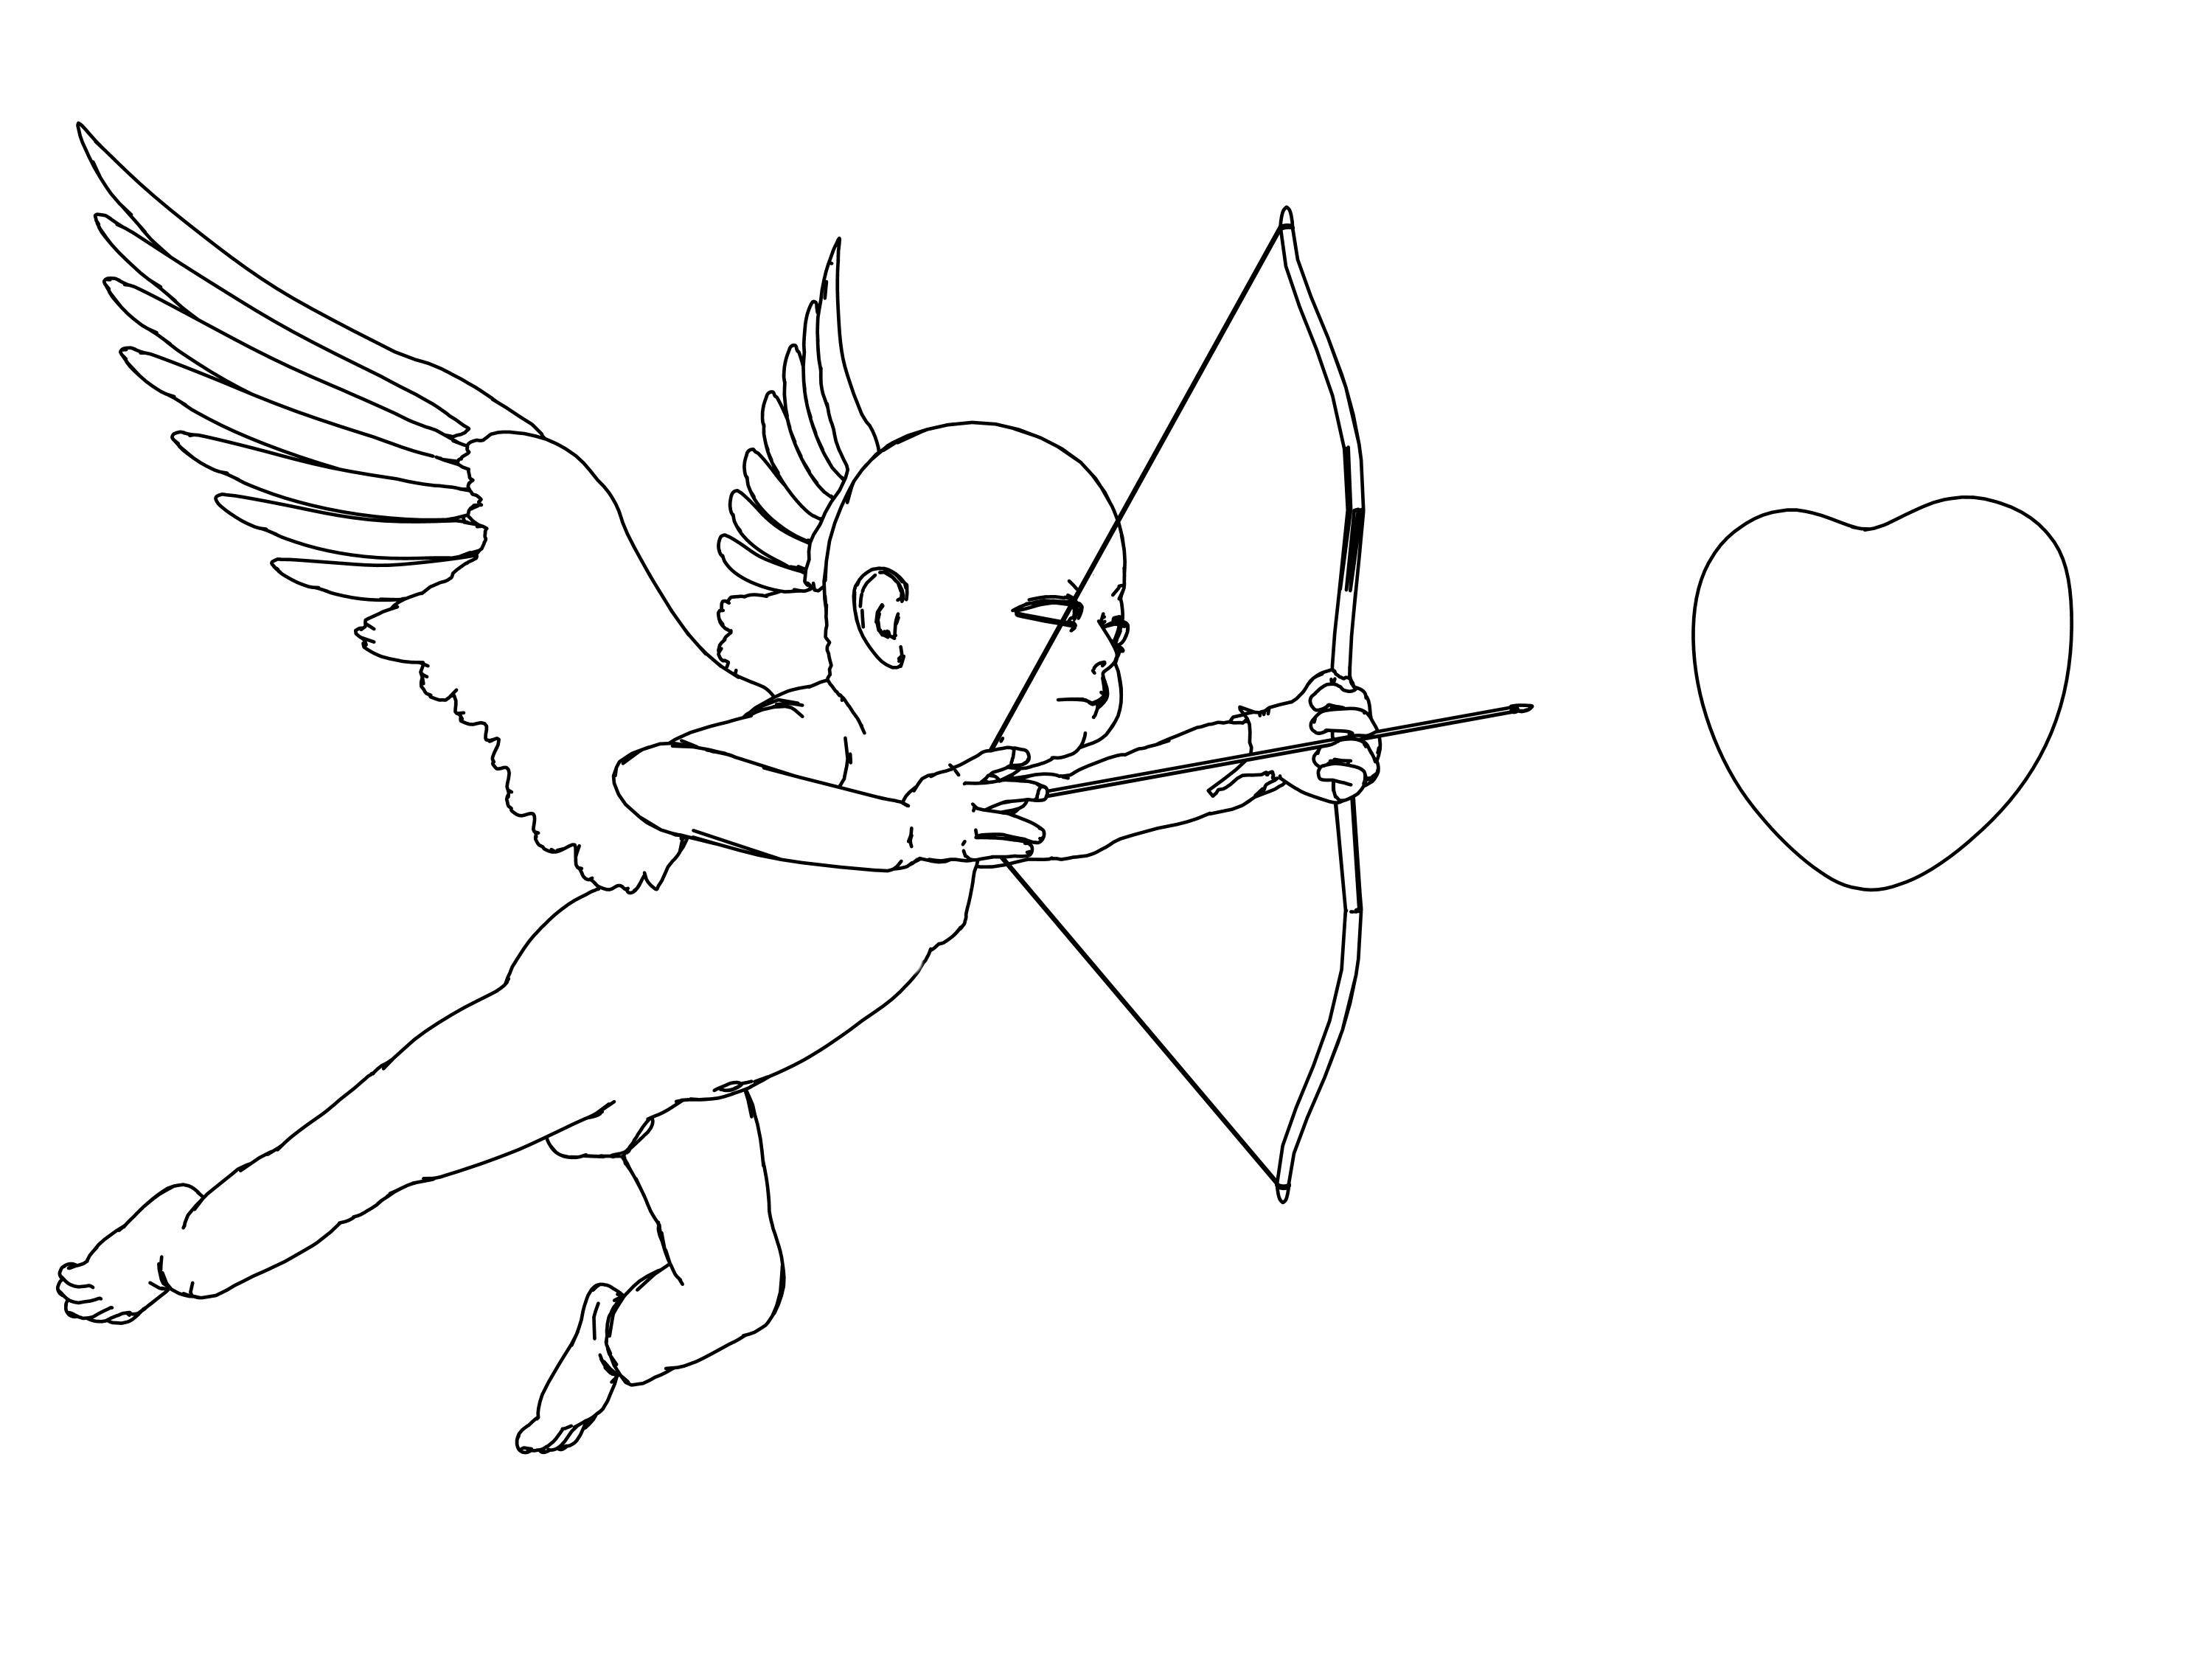 Heart With Arrow Coloring Pages at GetColorings.com | Free printable colorings pages ...